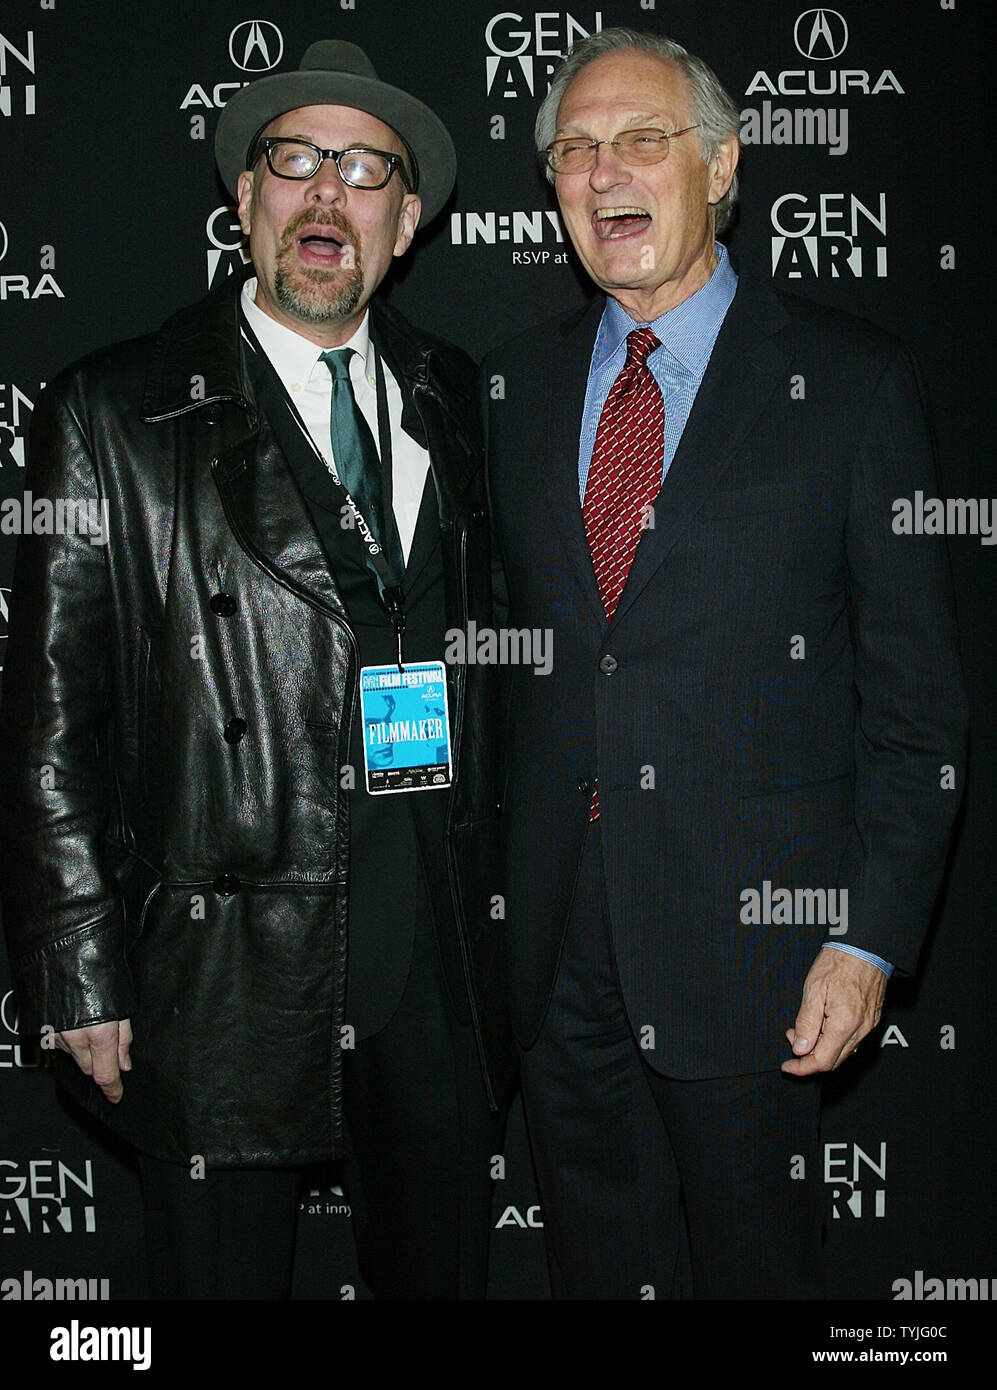 Terry Kinney (L) and Alan Alda arrive at the Gen Art Film Festival Premiere of 'Diminished Capacity' at the Ziegfeld Theater in New York on April 2, 2008.   (UPI Photo/Laura Cavanaugh) Stock Photo